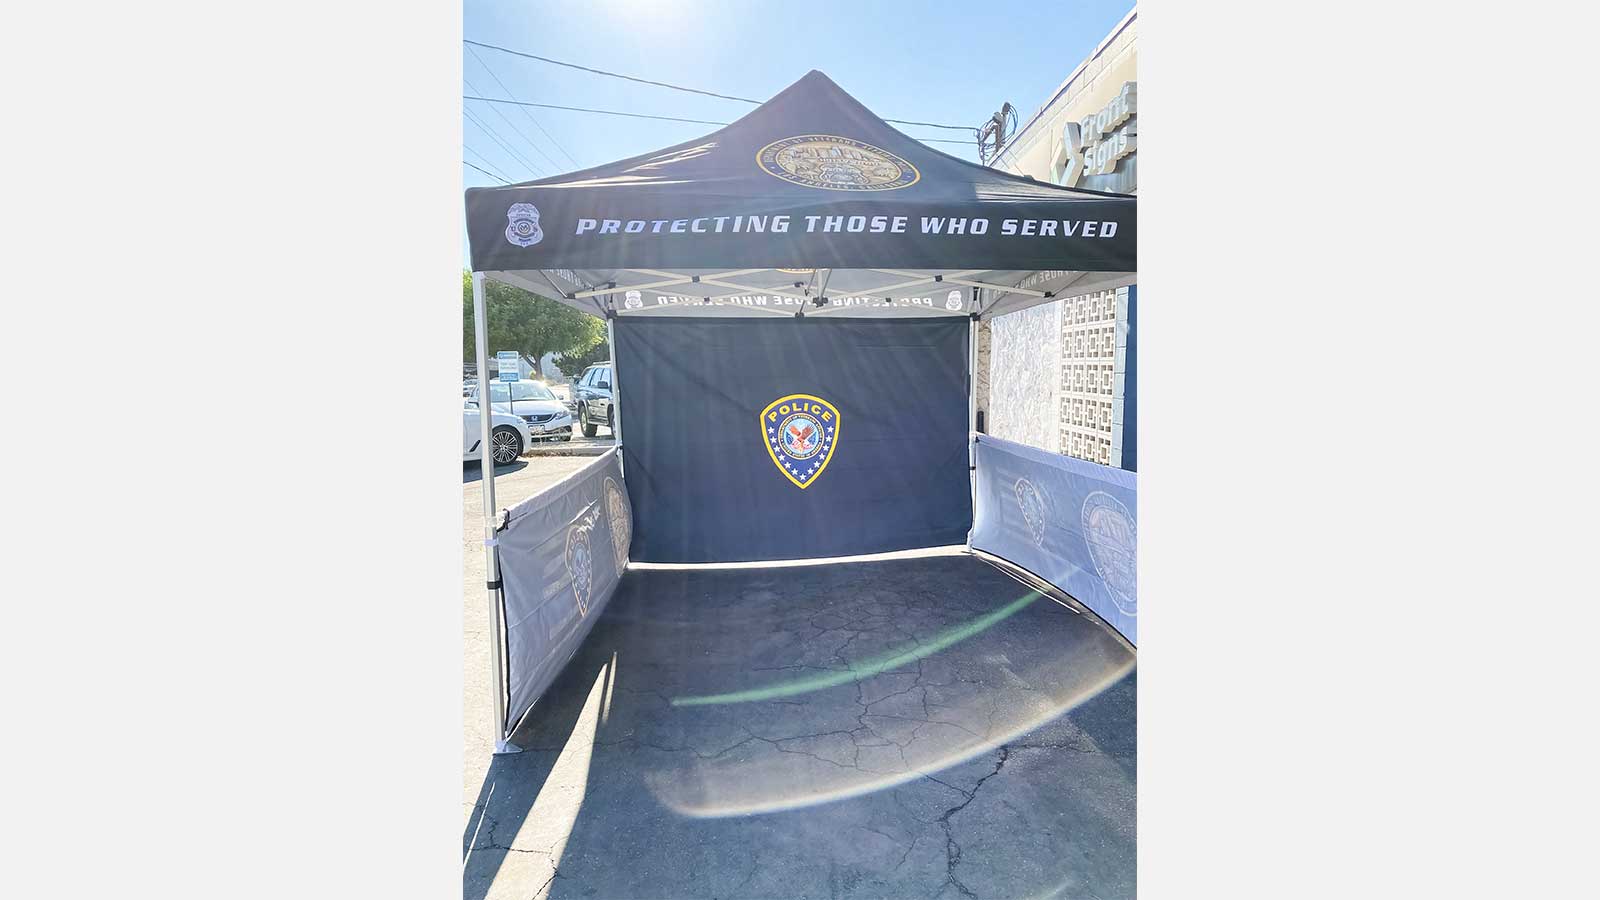 Police canopy tent with custom printed banners